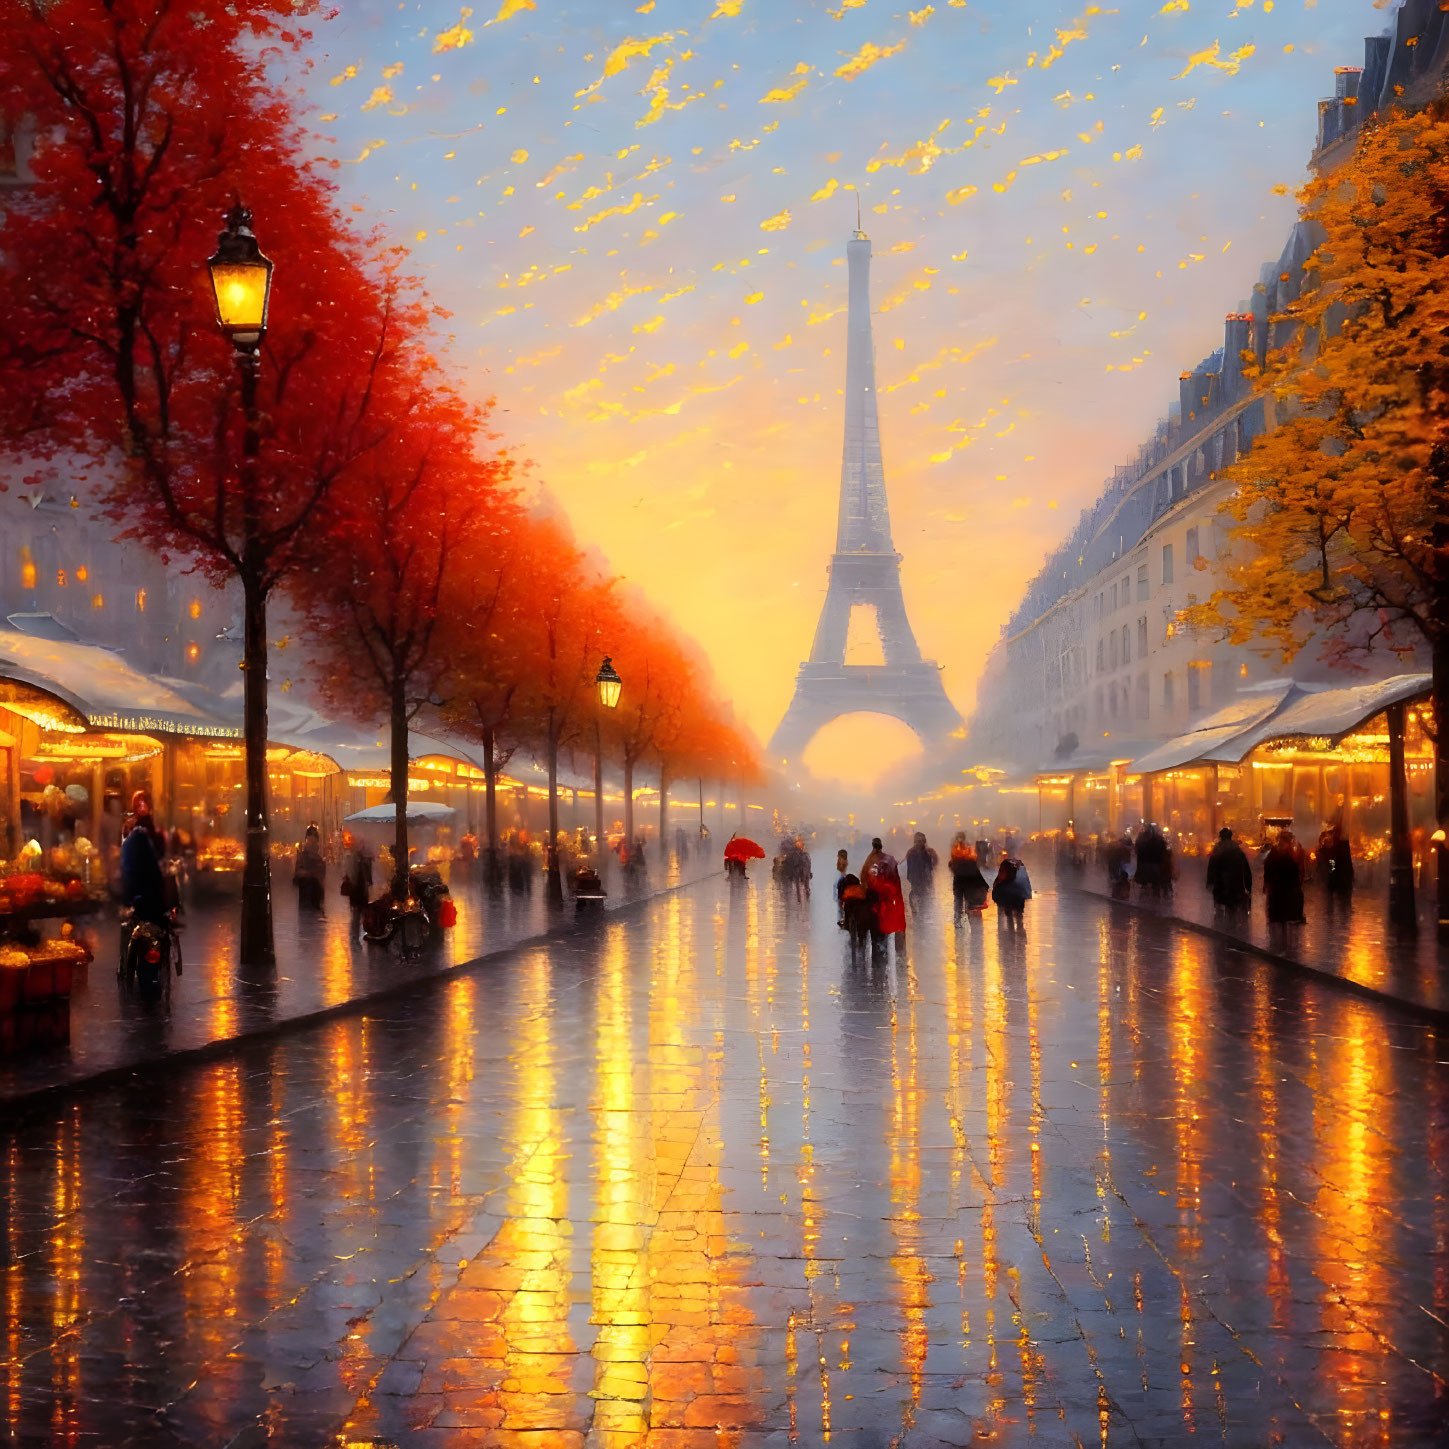 Autumn Eiffel Tower scene with golden leaves and people strolling